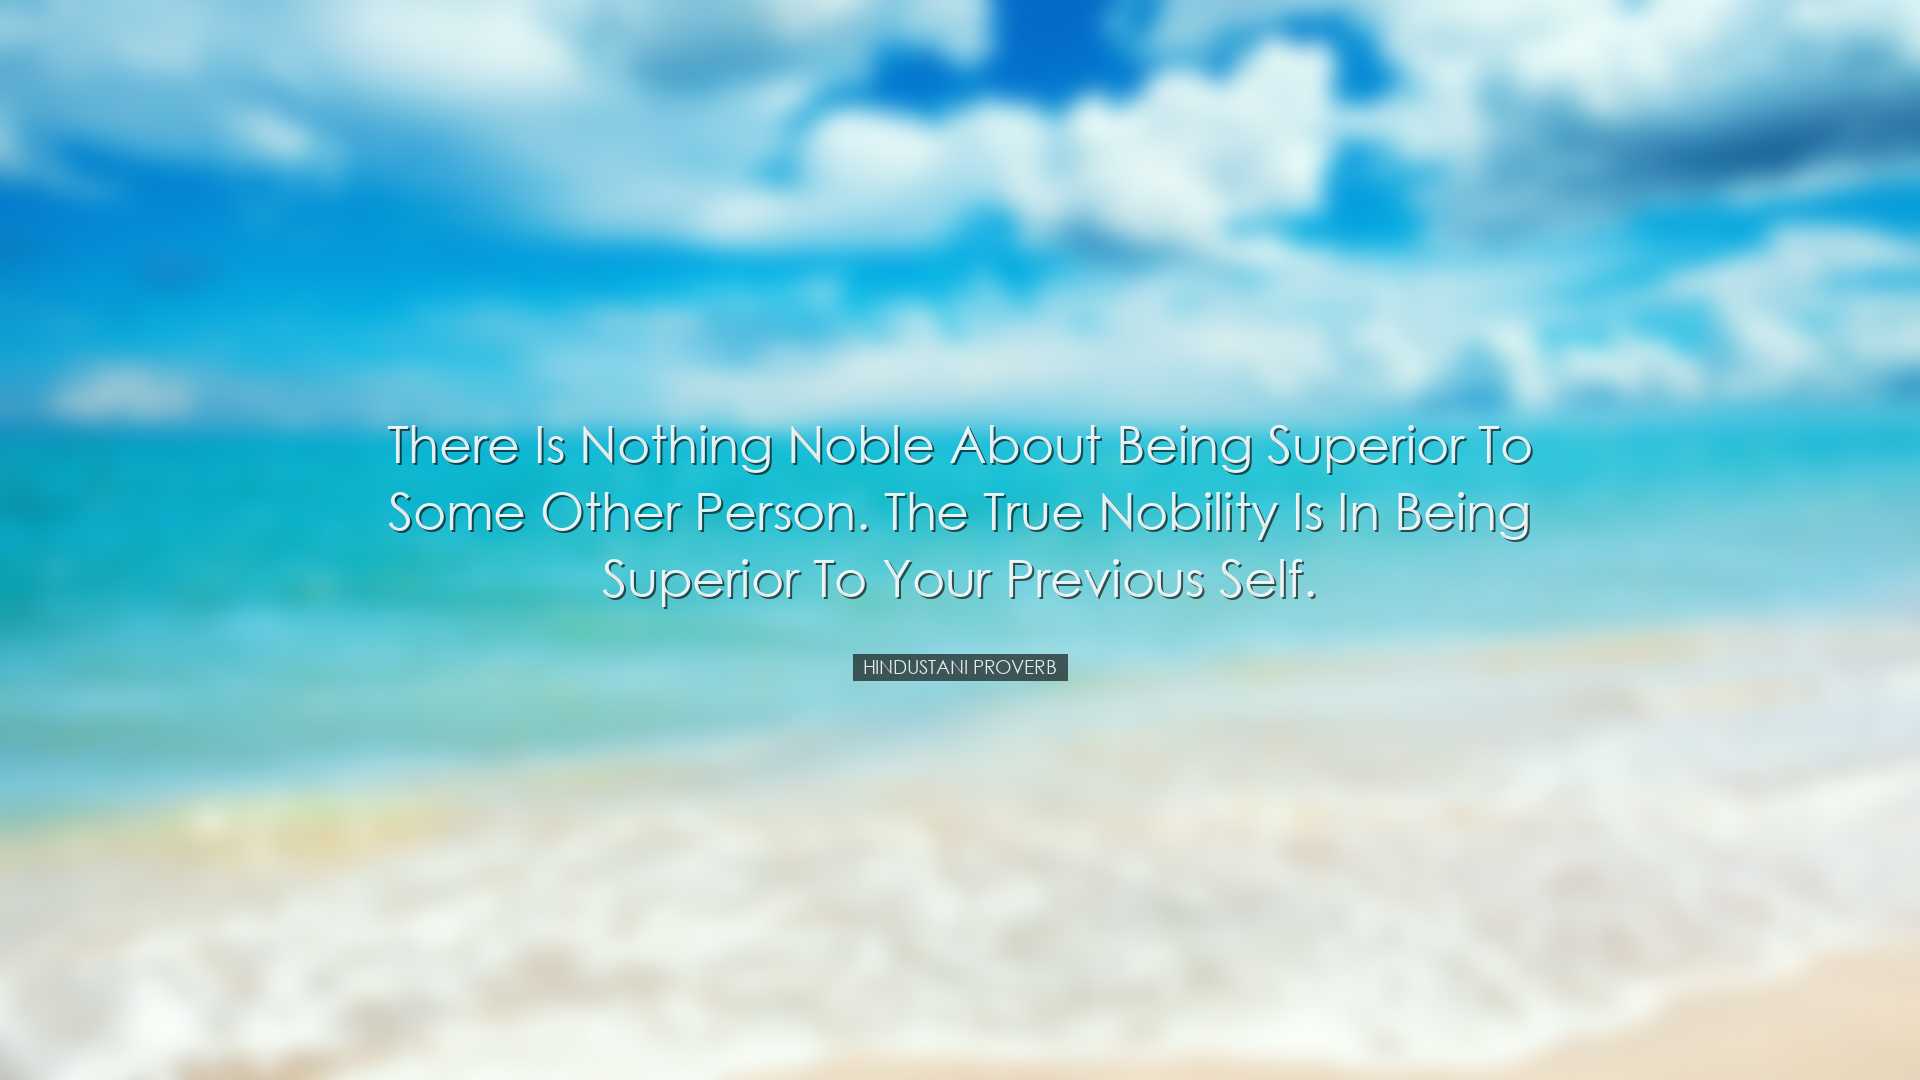 There is nothing noble about being superior to some other person.